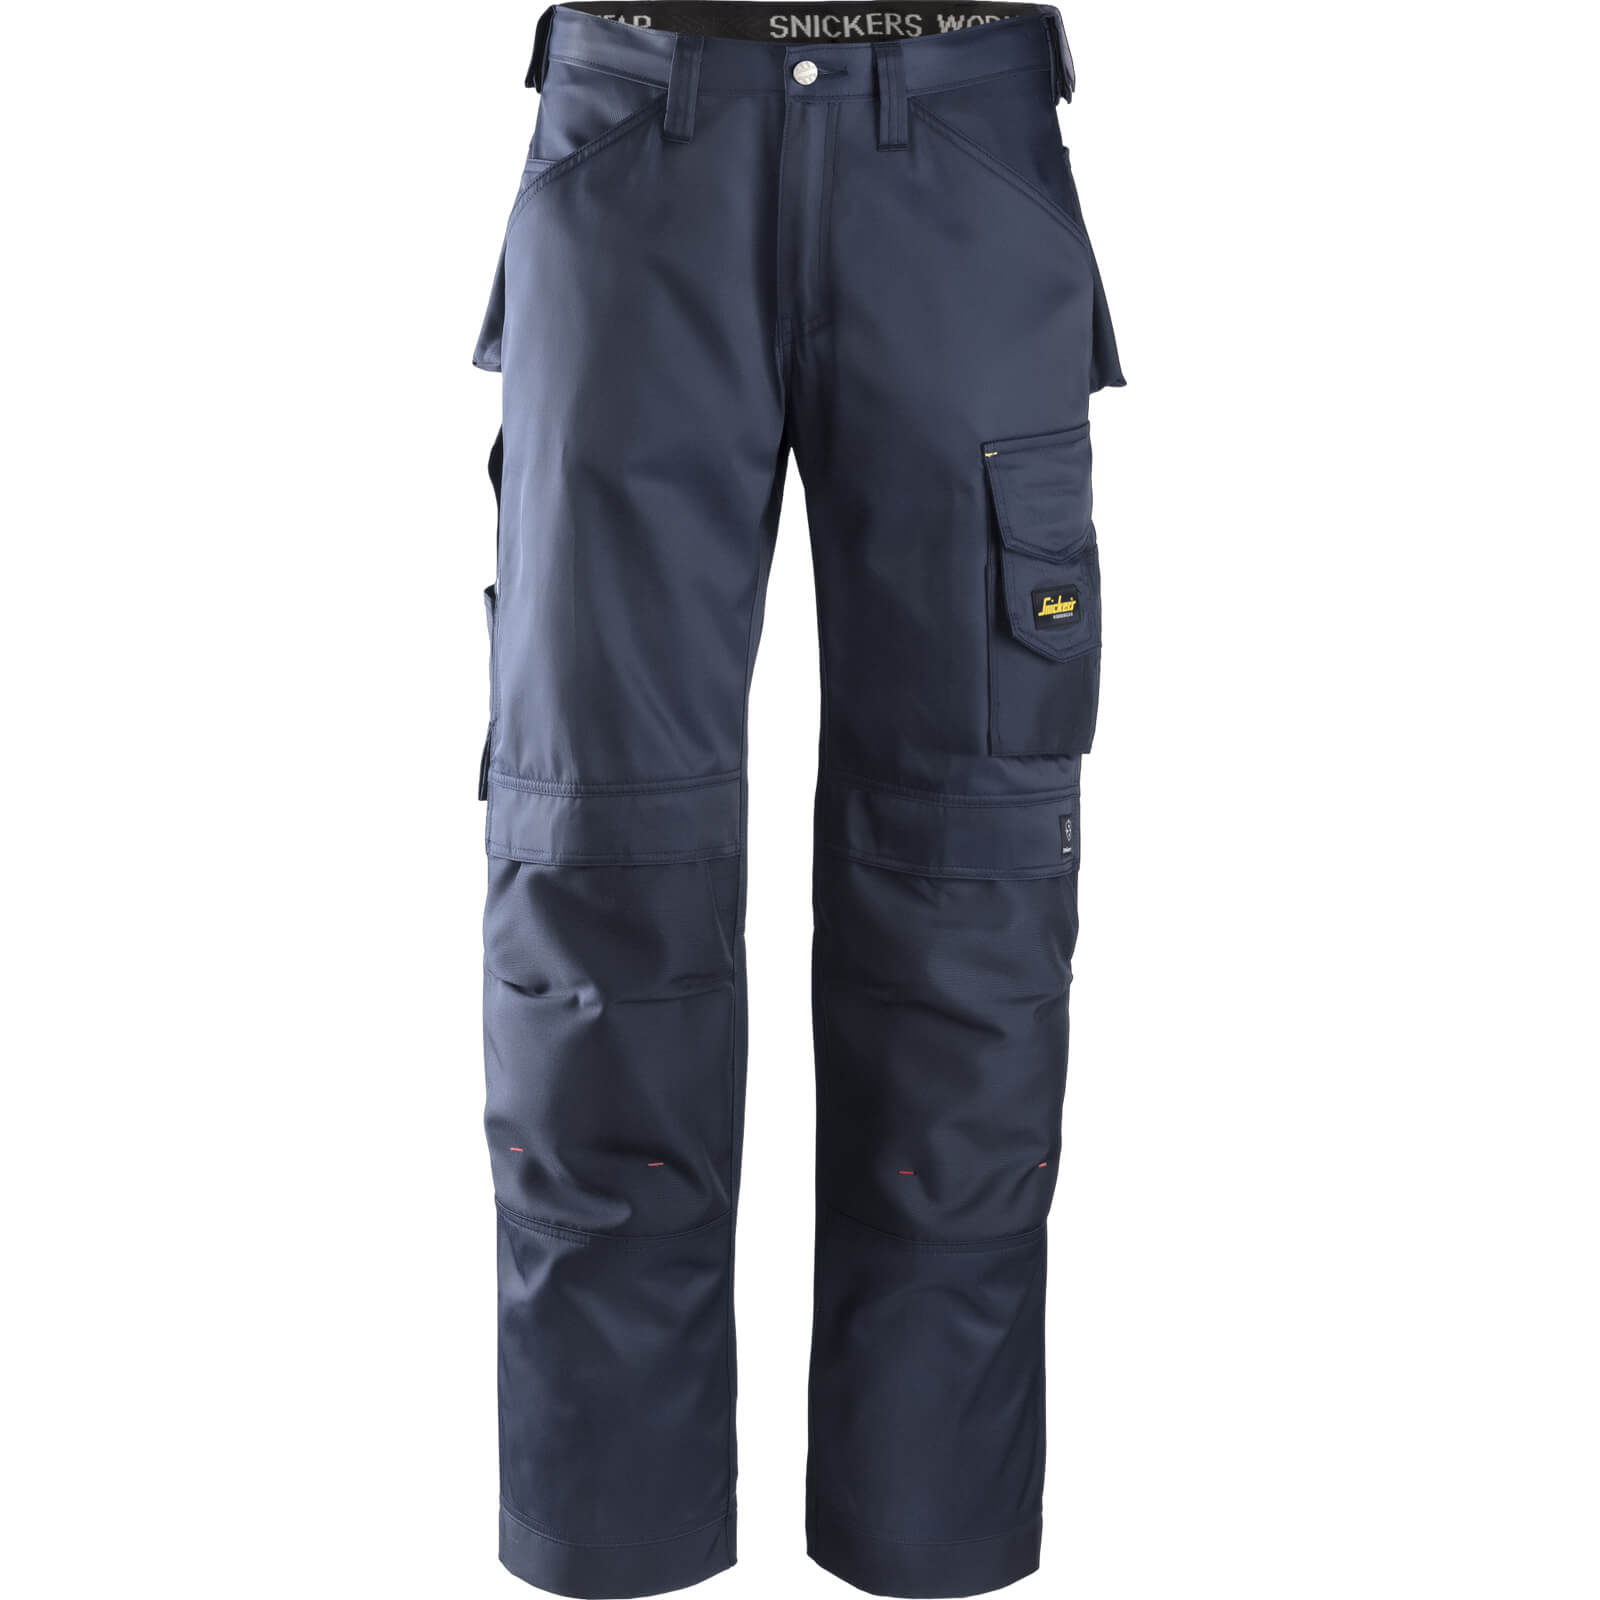 Image of Snickers 3312 Mens DuraTwill Work Trousers Navy 31" 35"